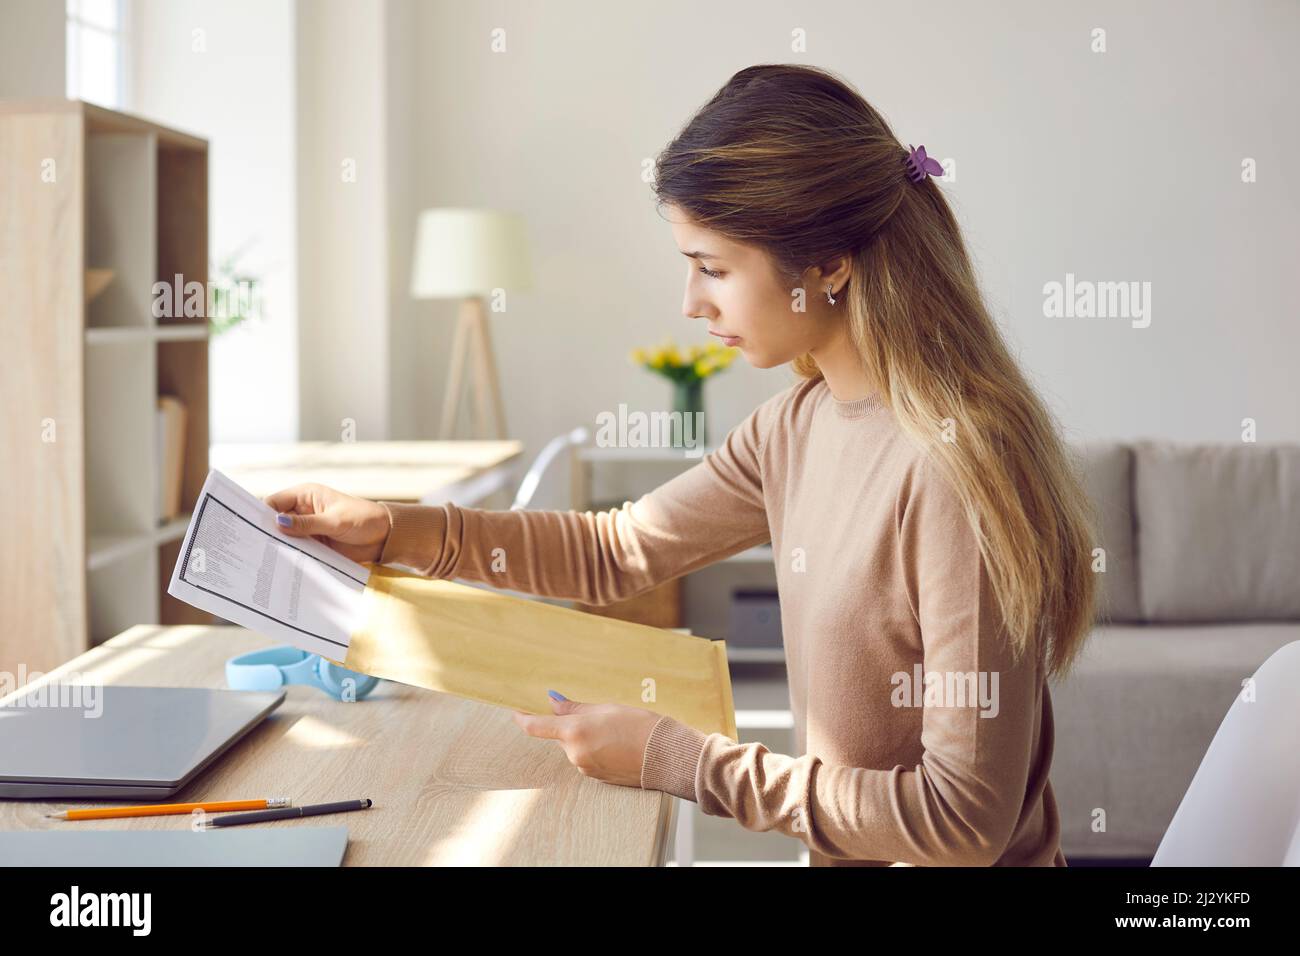 Student girl taking letter out of envelope while sitting at working desk with laptop at home Stock Photo